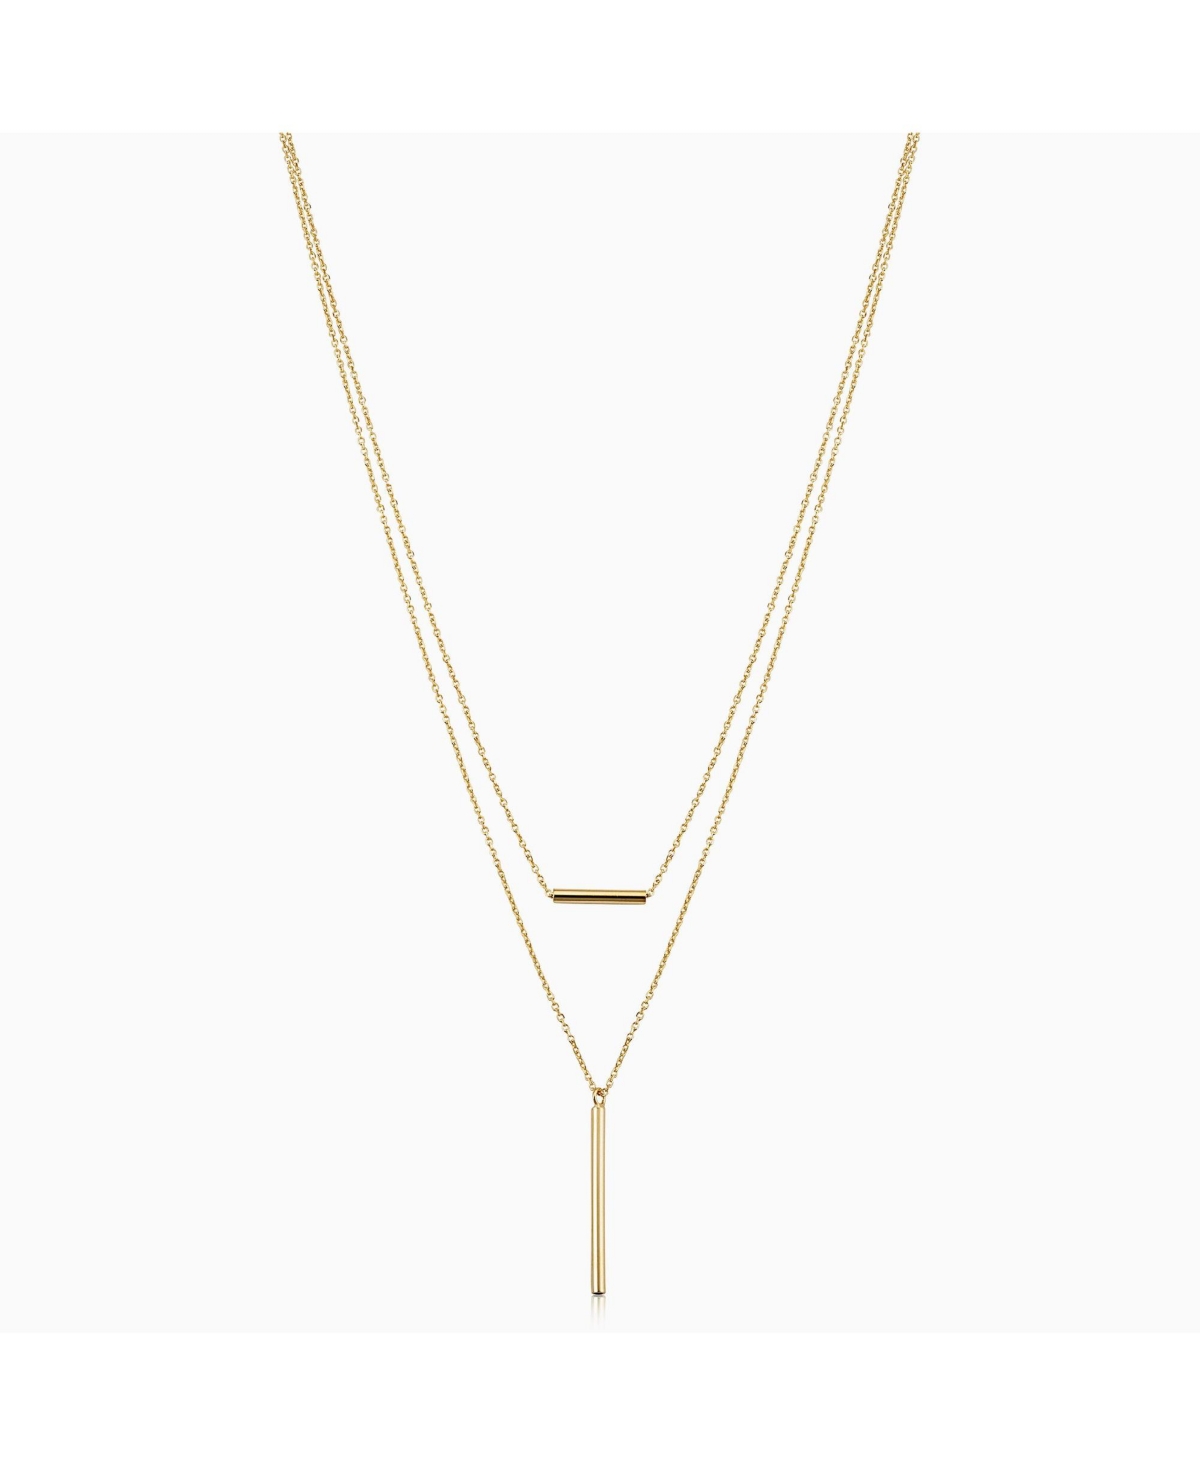 ORADINA VICENZA LAYERED NECKLACE 17-18" IN 14K YELLOW GOLD